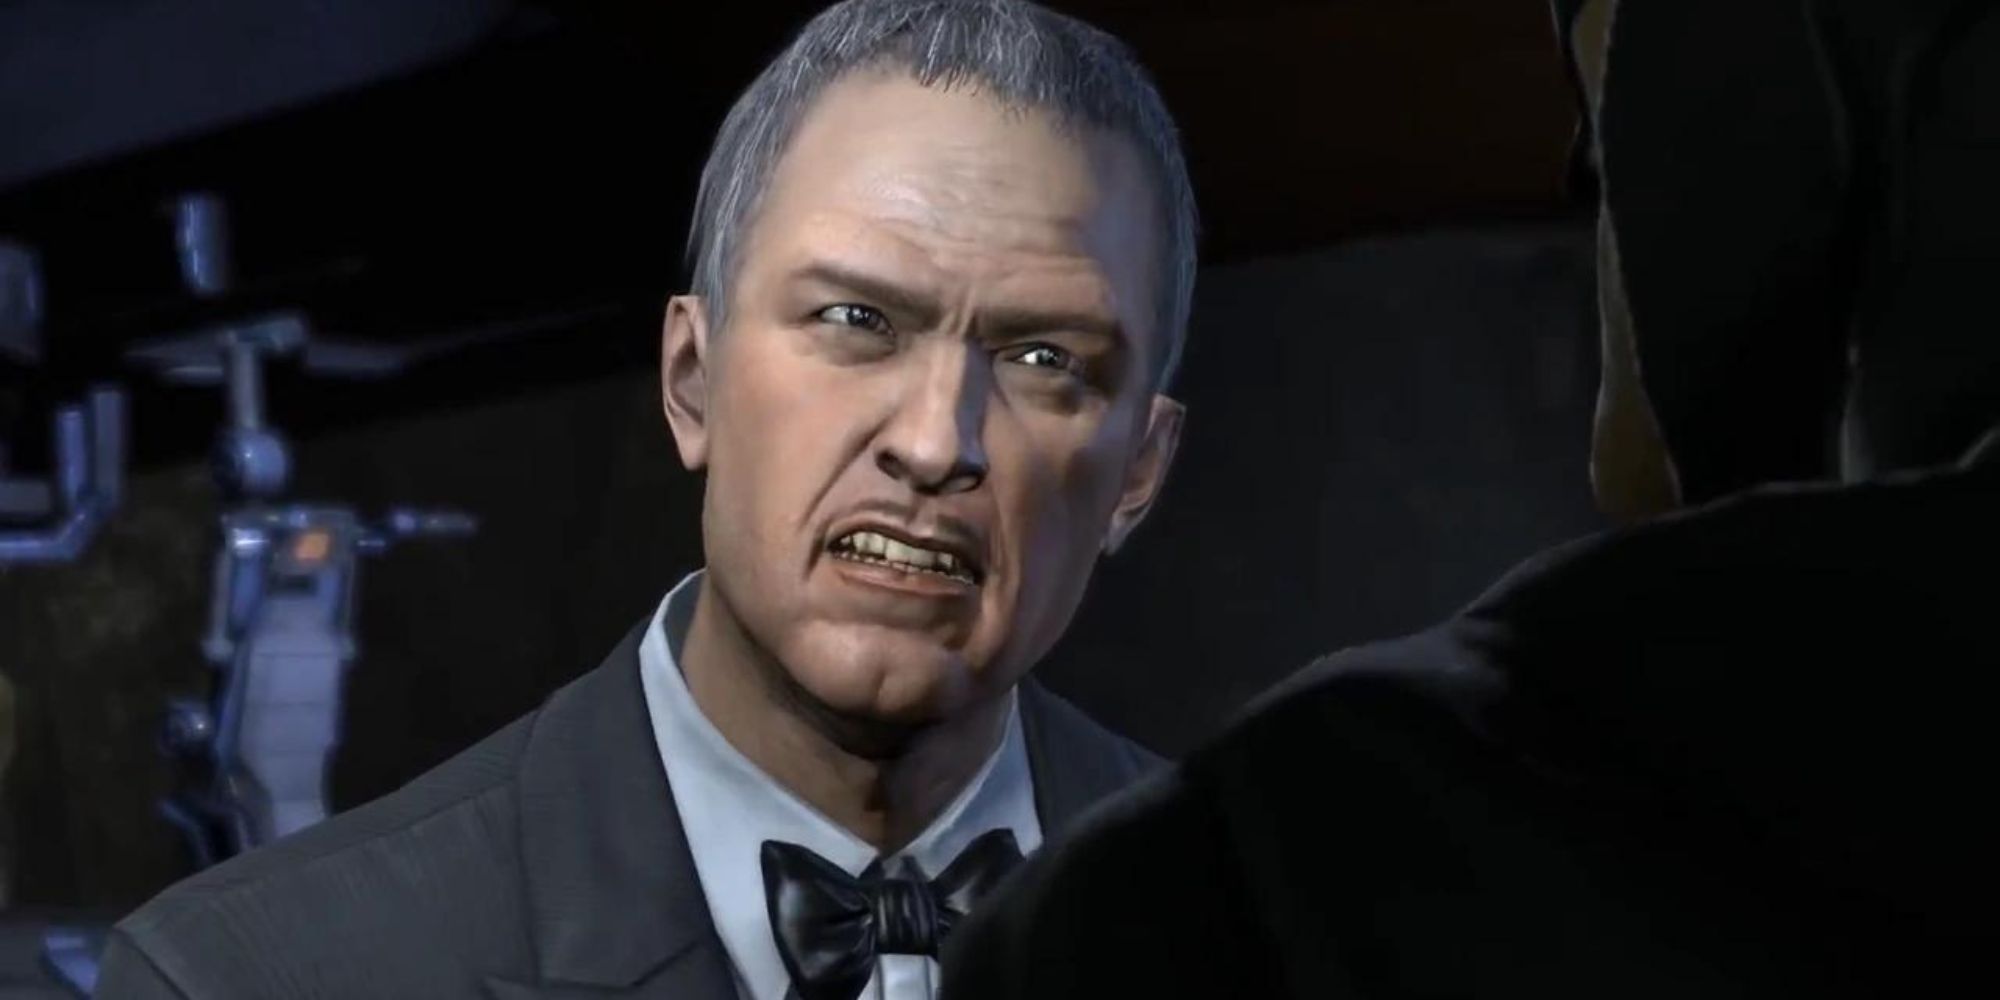 A close up of Alfred from the Batman Arkham game series looking angry